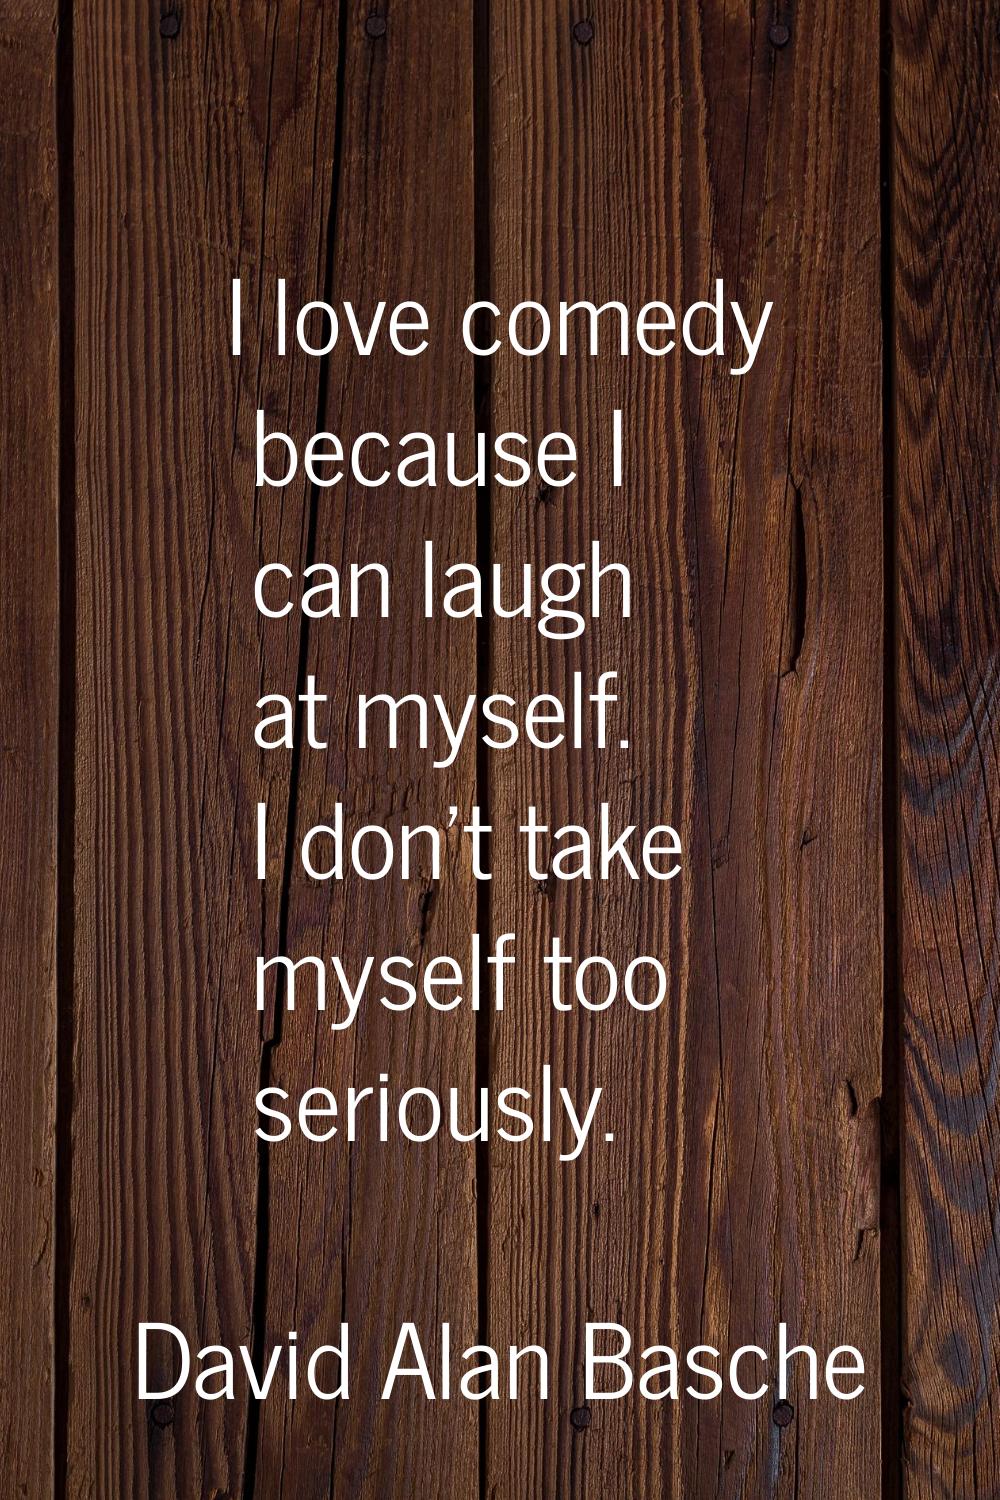 I love comedy because I can laugh at myself. I don't take myself too seriously.